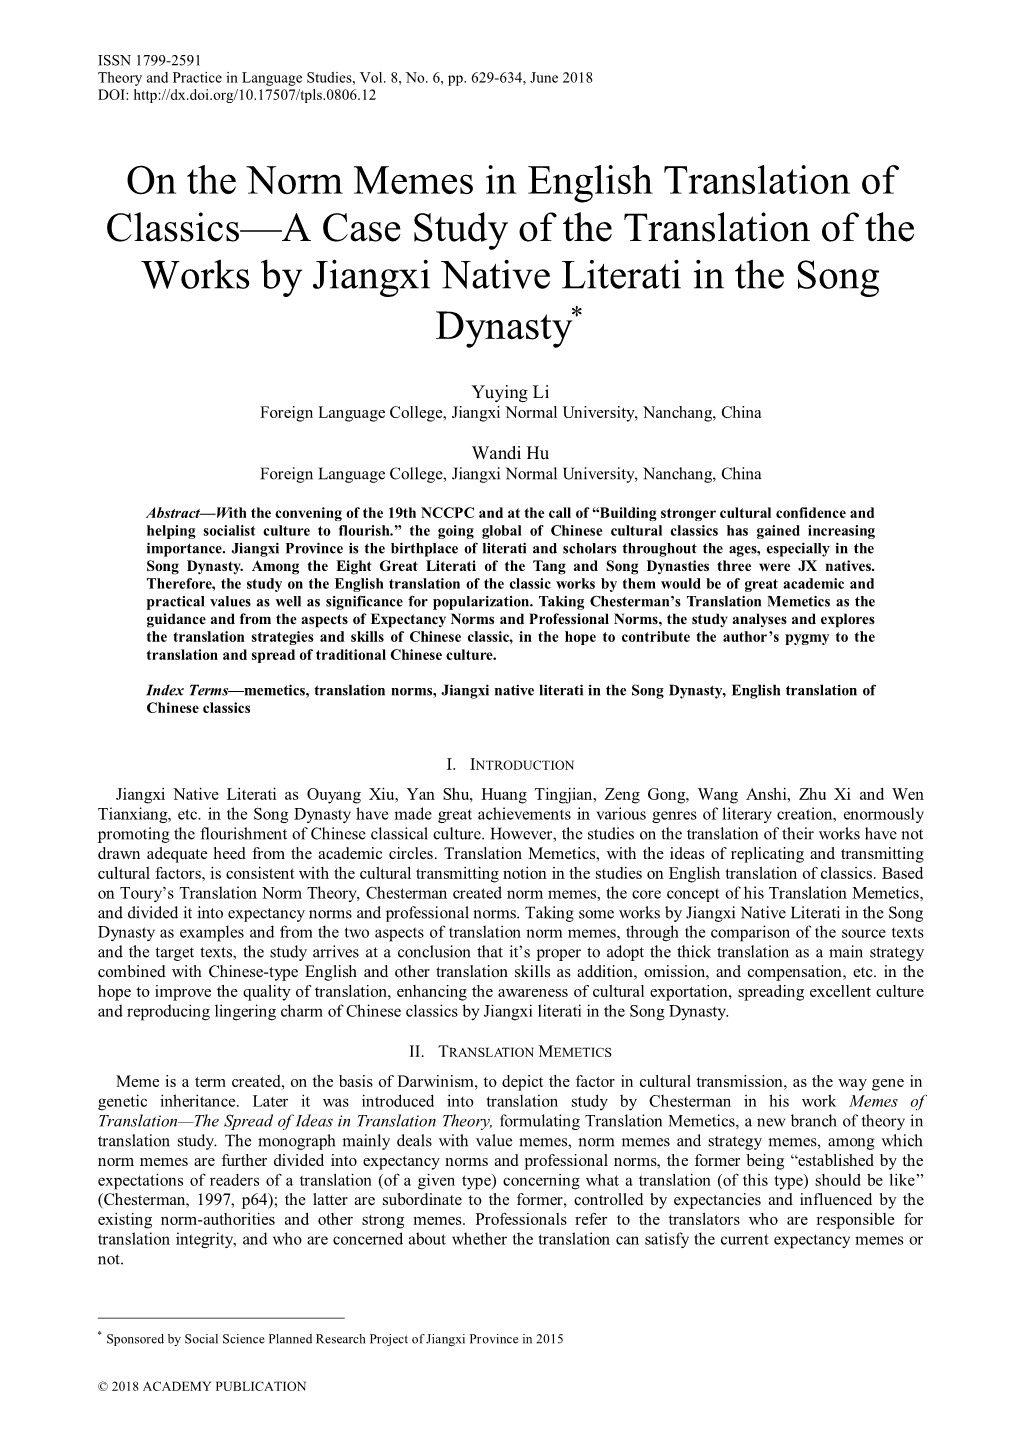 On the Norm Memes in English Translation of Classics—A Case Study of the Translation of the Works by Jiangxi Native Literati in the Song Dynasty